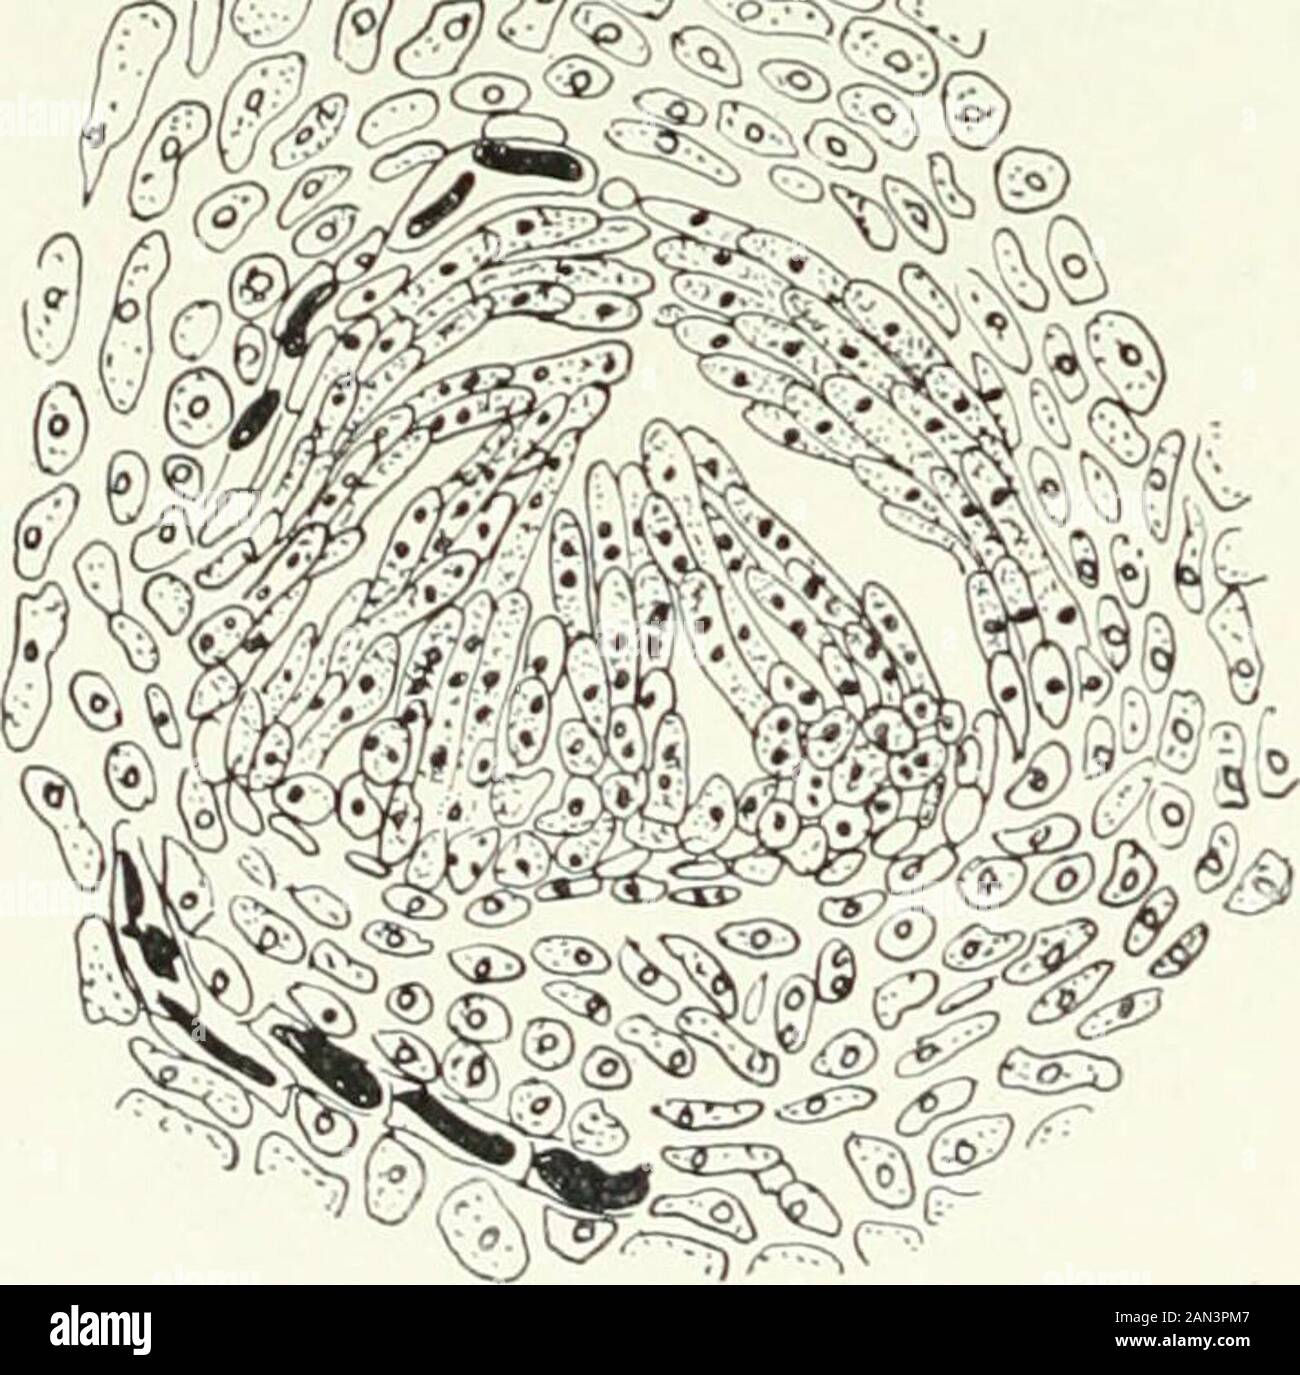 Fungi, Ascomycetes, Ustilaginales, Uredinales . ationof a vegetative and a female nucleus. The binucleate character of the later formed large cells may, as hesuggests, be due to conjugate division, but, since he finds that the numerousbinucleate cells in the sheath1 are the result of rapid growth, this characterin the large cells is evidently susceptible of the same explanation. In anycase the rest of the archicarp degenerates and owing to the refractorycharacter of the material the ascogenous hyphae could not be further traced. According to Blackman and Welsford, all the cells of the archicar Stock Photo